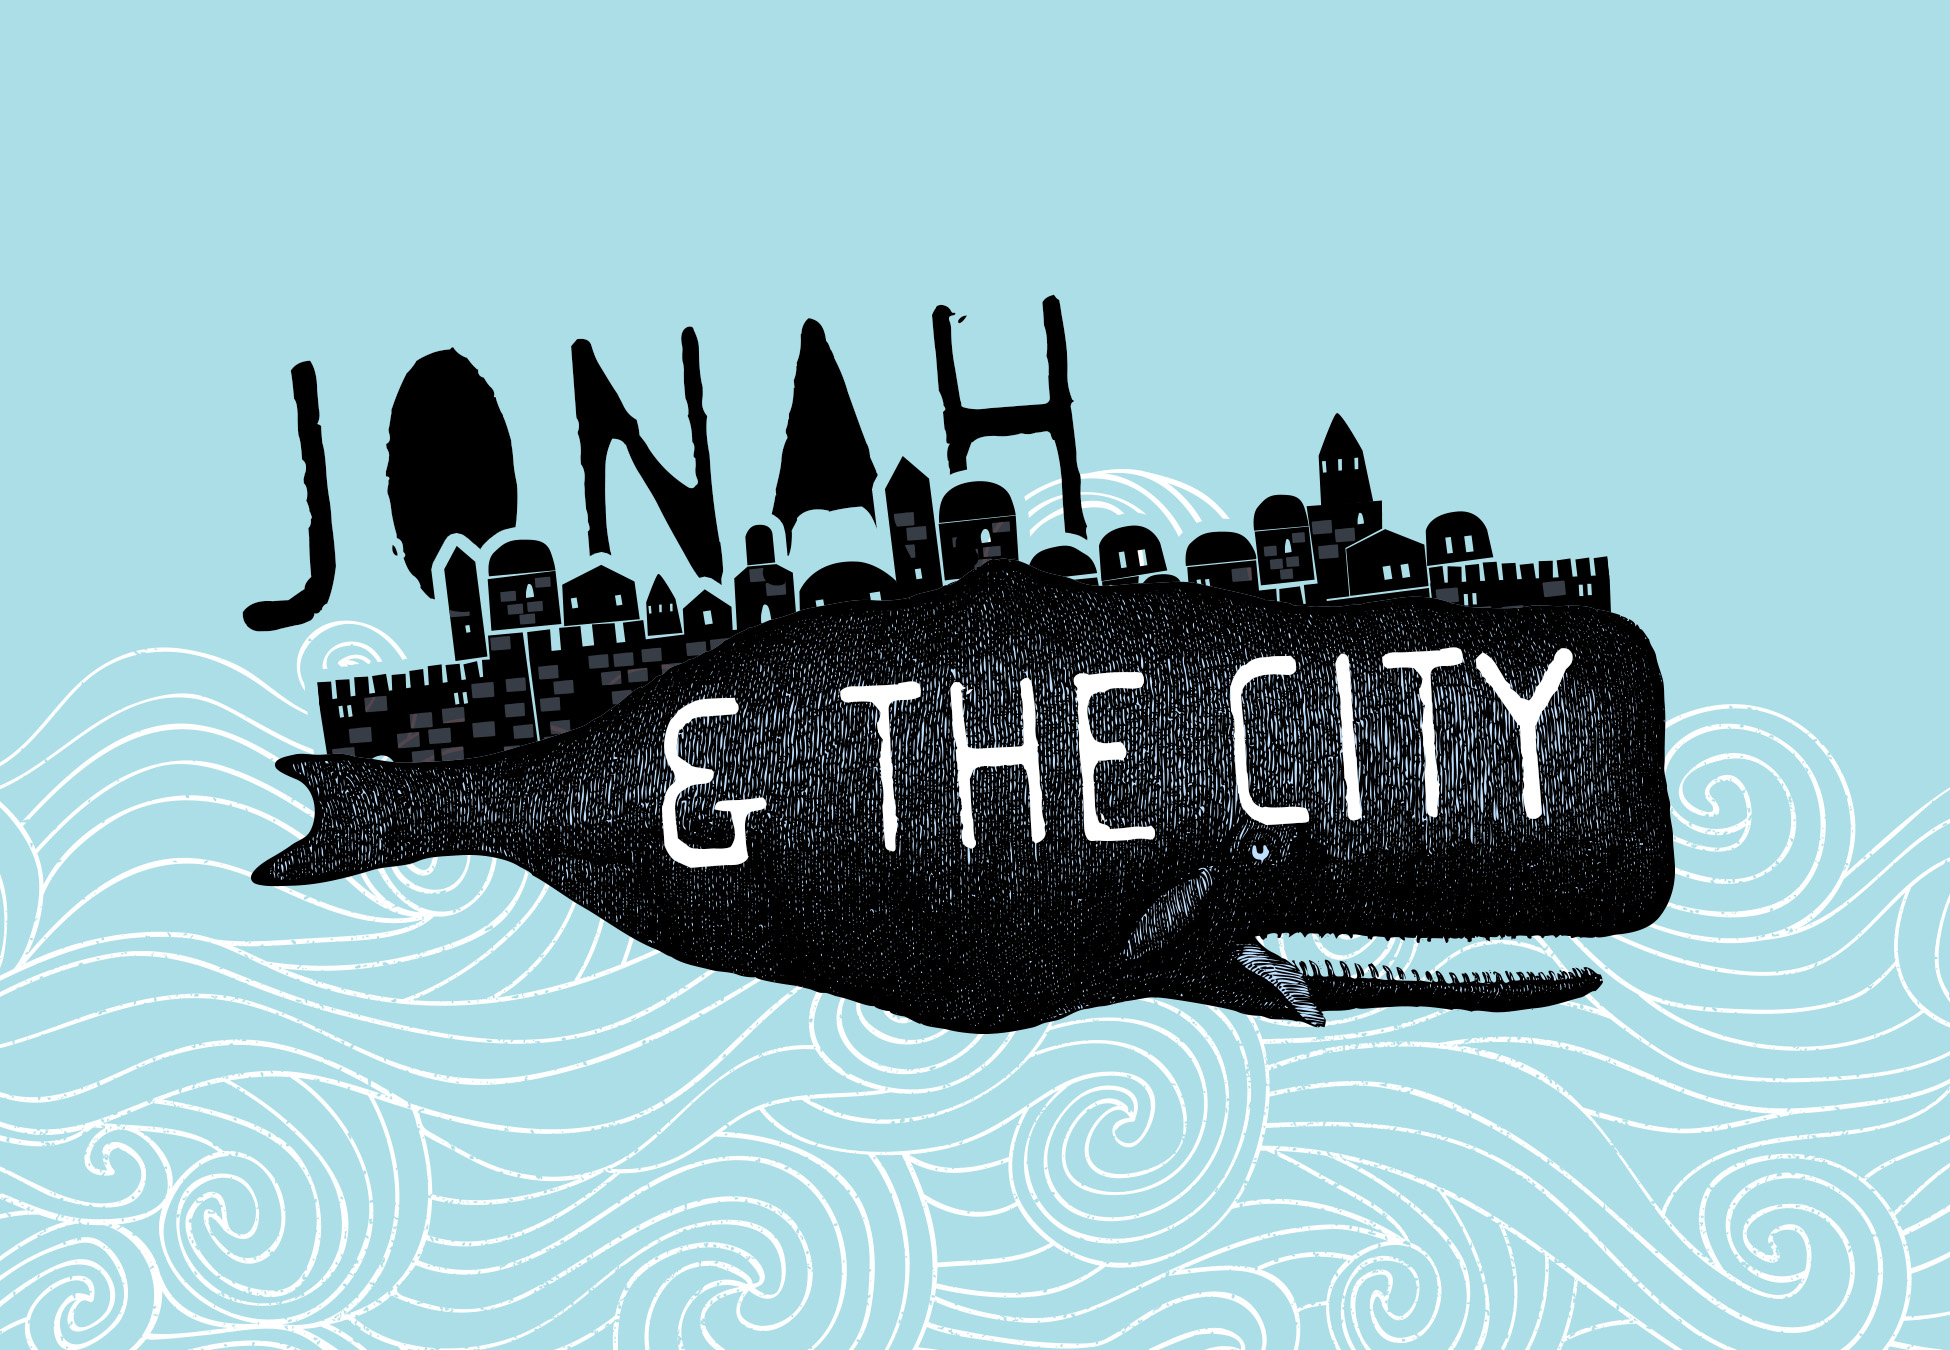 Jonah and the city banner